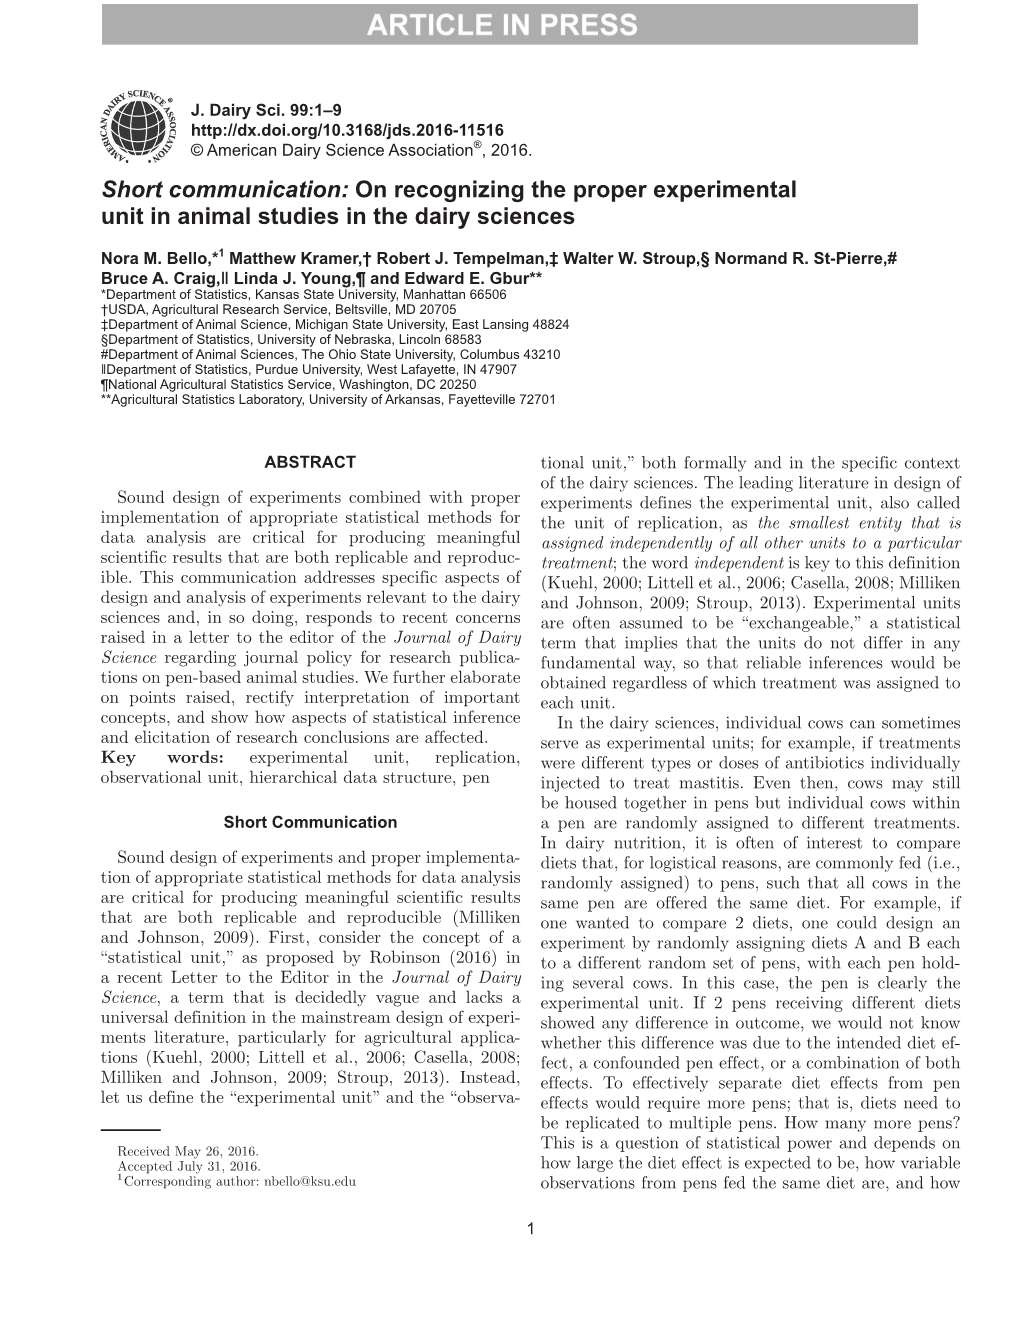 On Recognizing the Proper Experimental Unit in Animal Studies in the Dairy Sciences